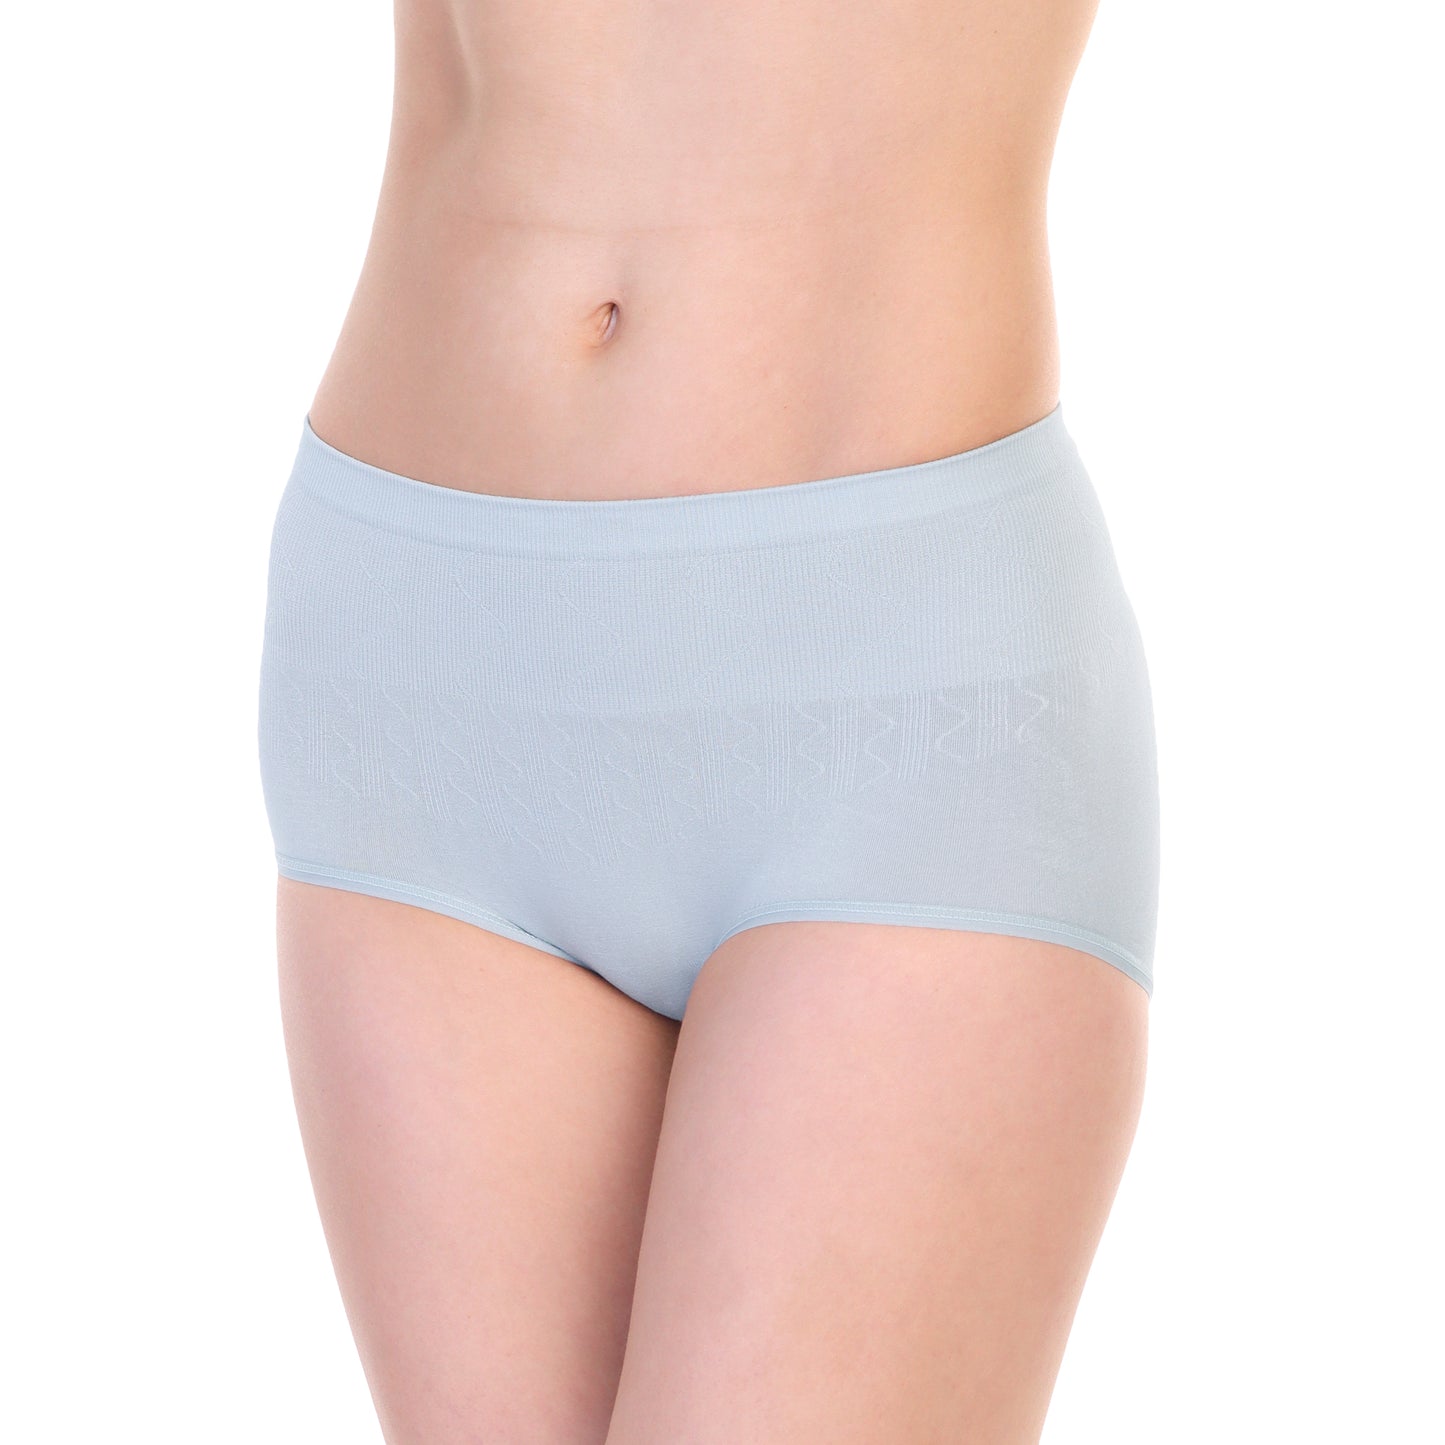 Angelina Seamless Cotton Light-Control Mid-Rise Briefs Panties (6 or 12 Pack), #SE904